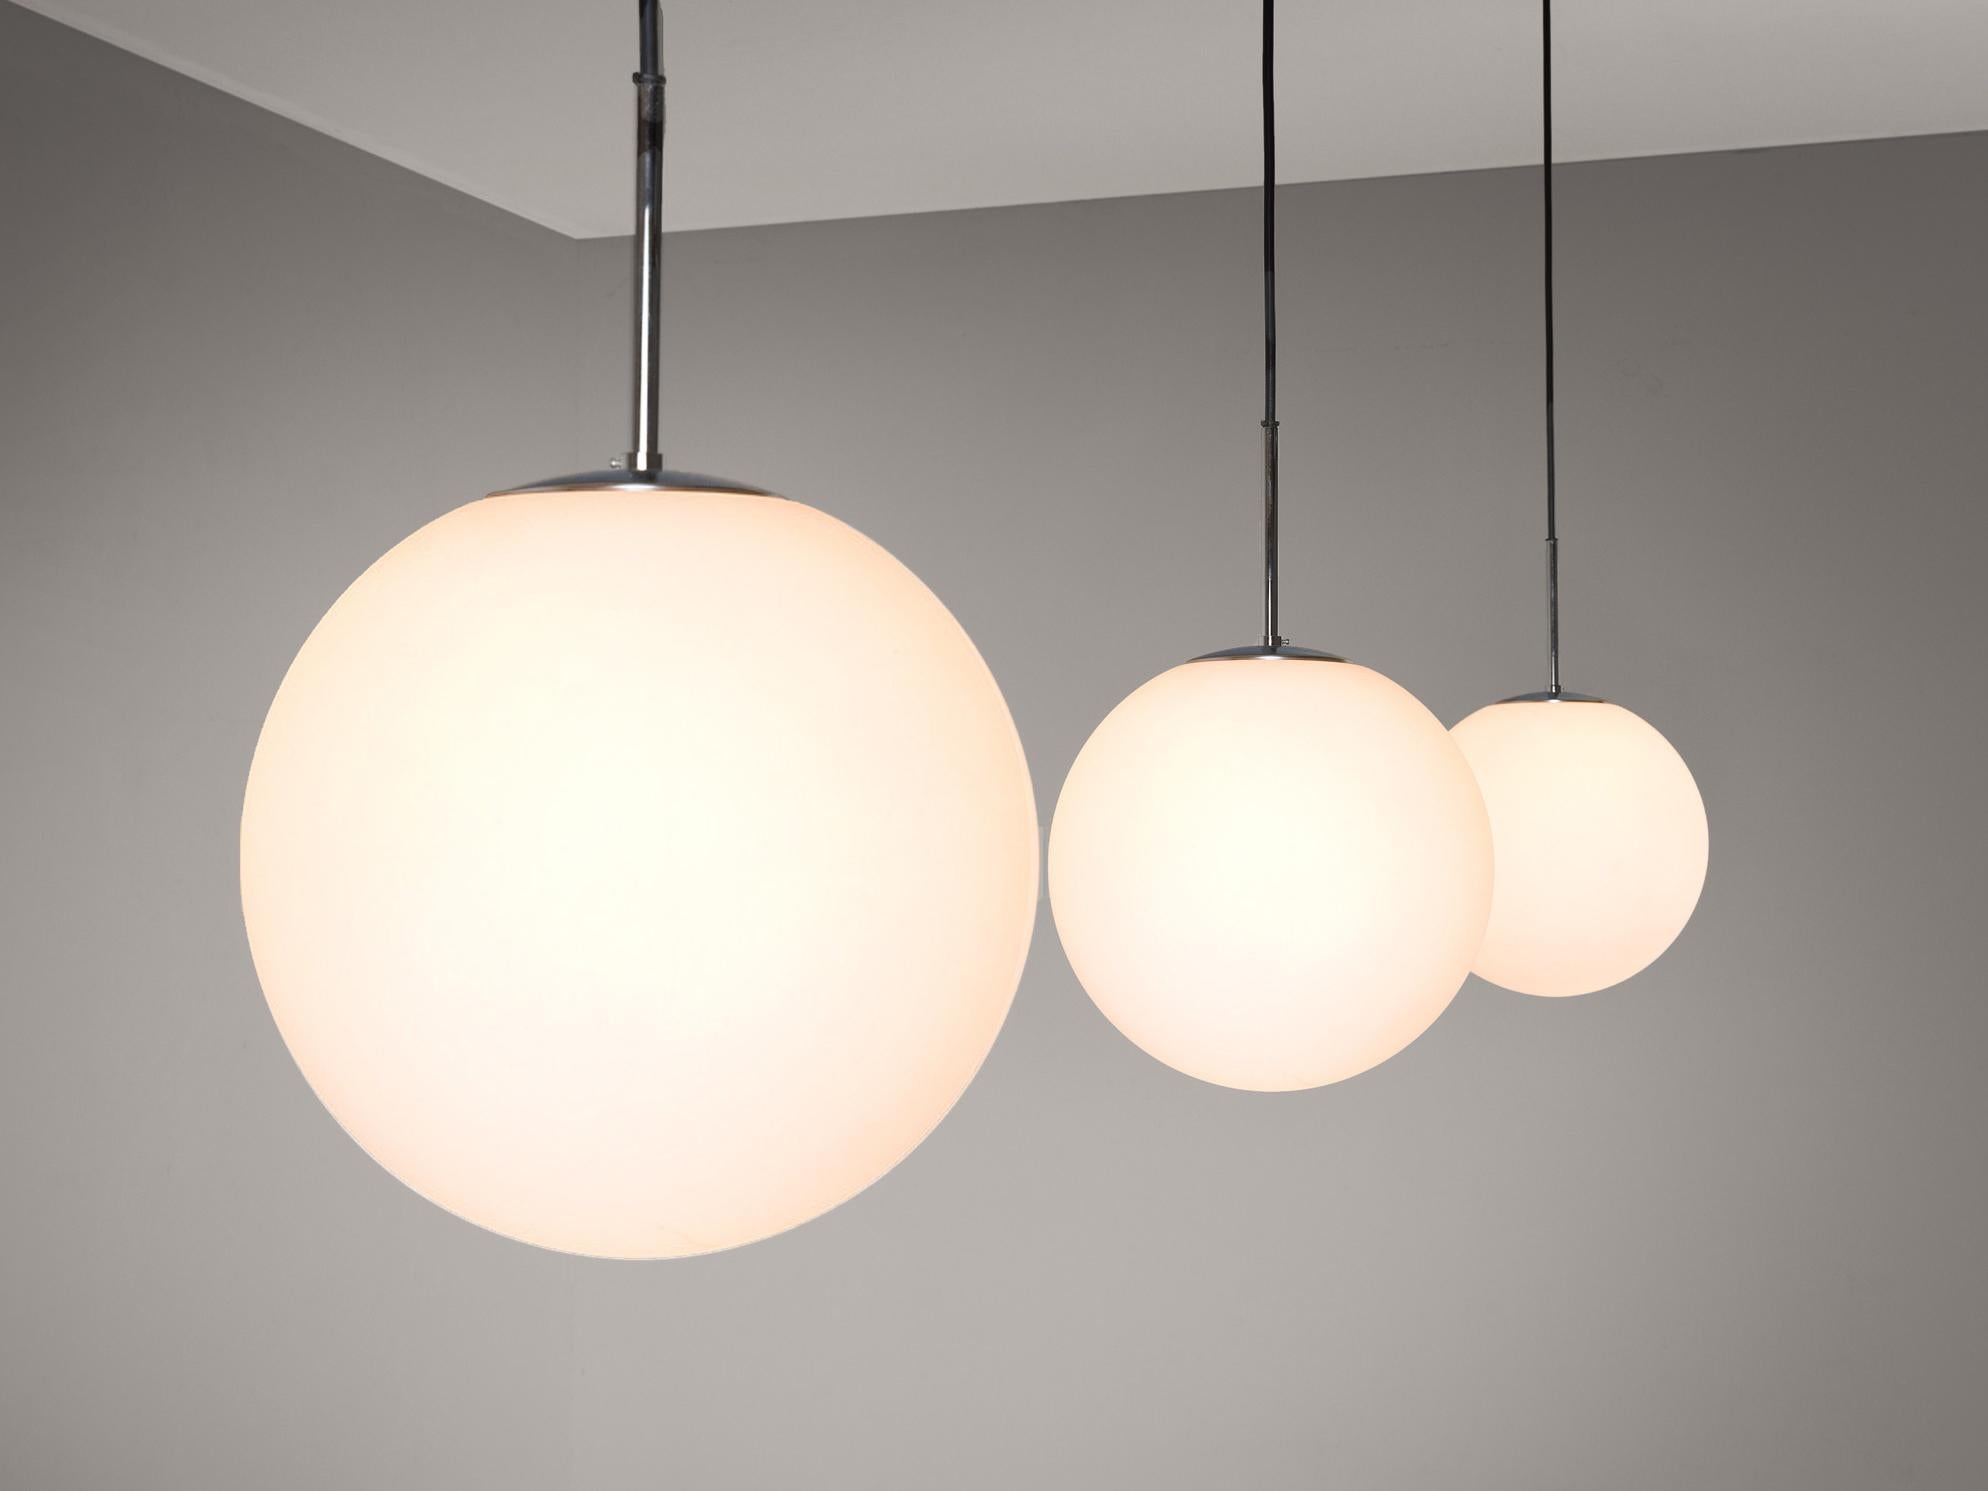 Pendants, opaline glass, metal, Europe 1970s. 

Set of modern pendants with white opaline glass globe shaped spheres. overall, an elegant but simplistic design with a globe shaped sphere. Due the opaline glass and the light point, these pendants